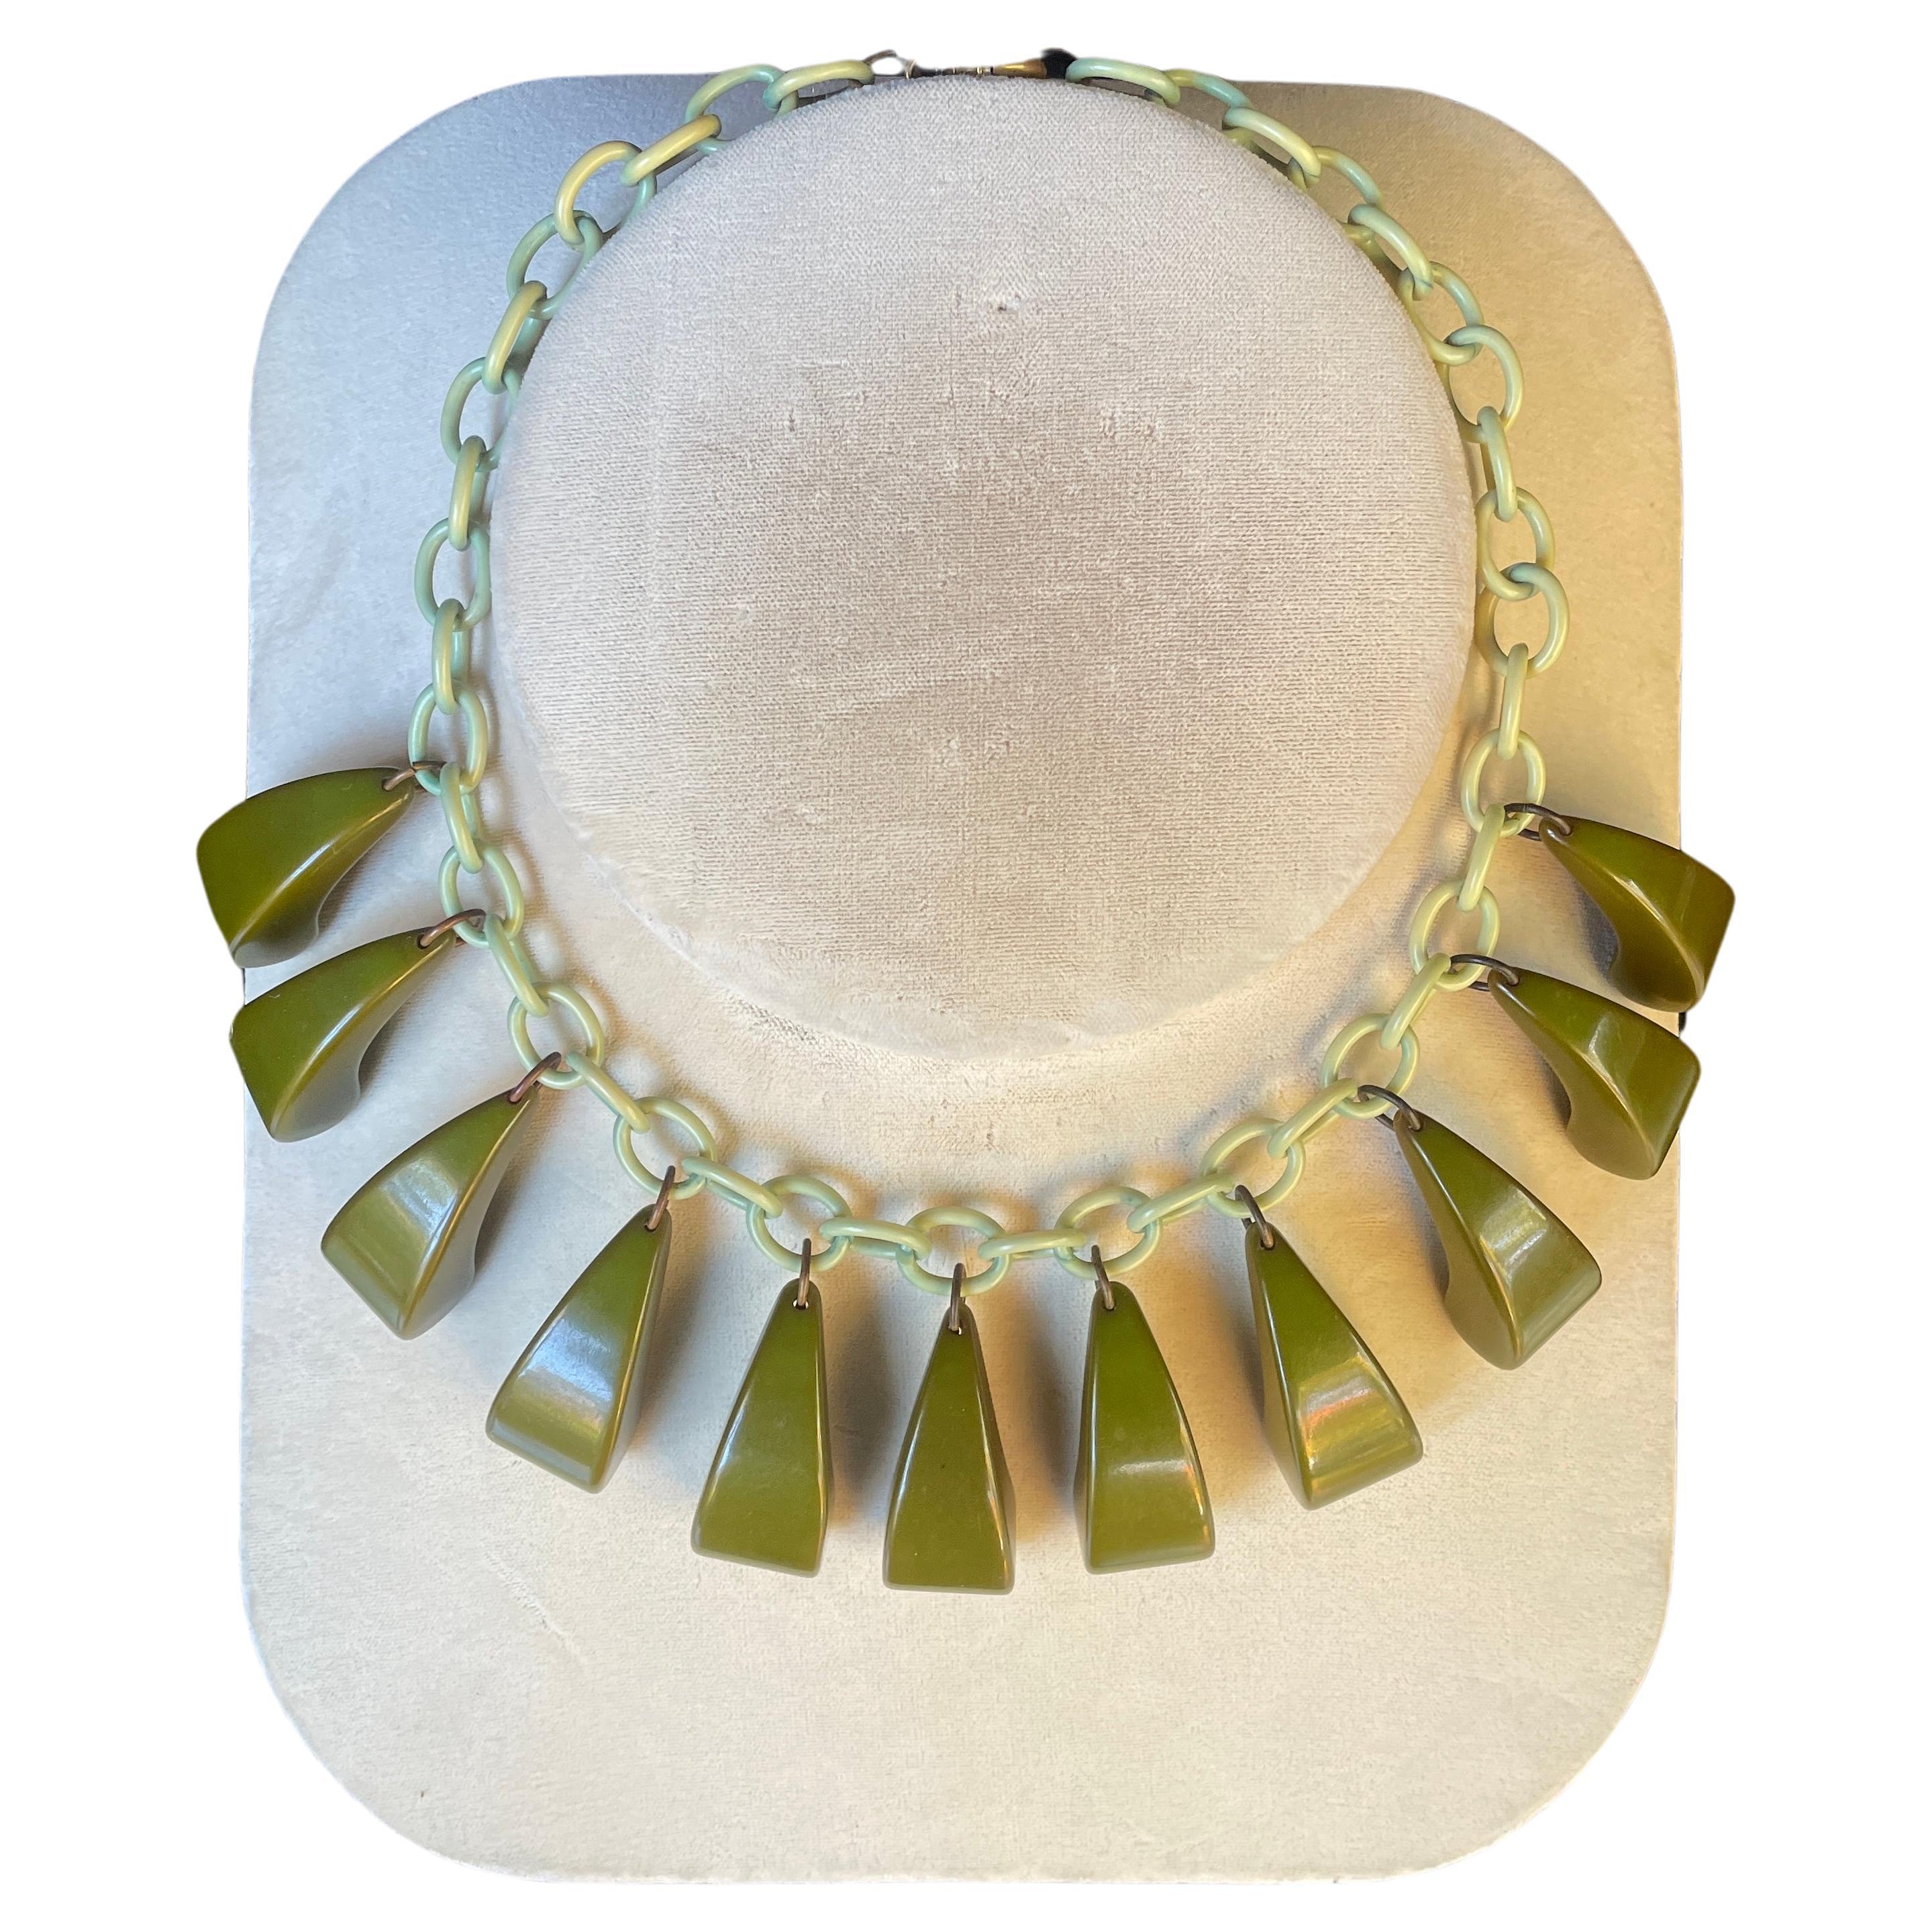 1930s Art Deco Bakelite + Celluloid Linked Necklace Dark Green Arching Dangles For Sale